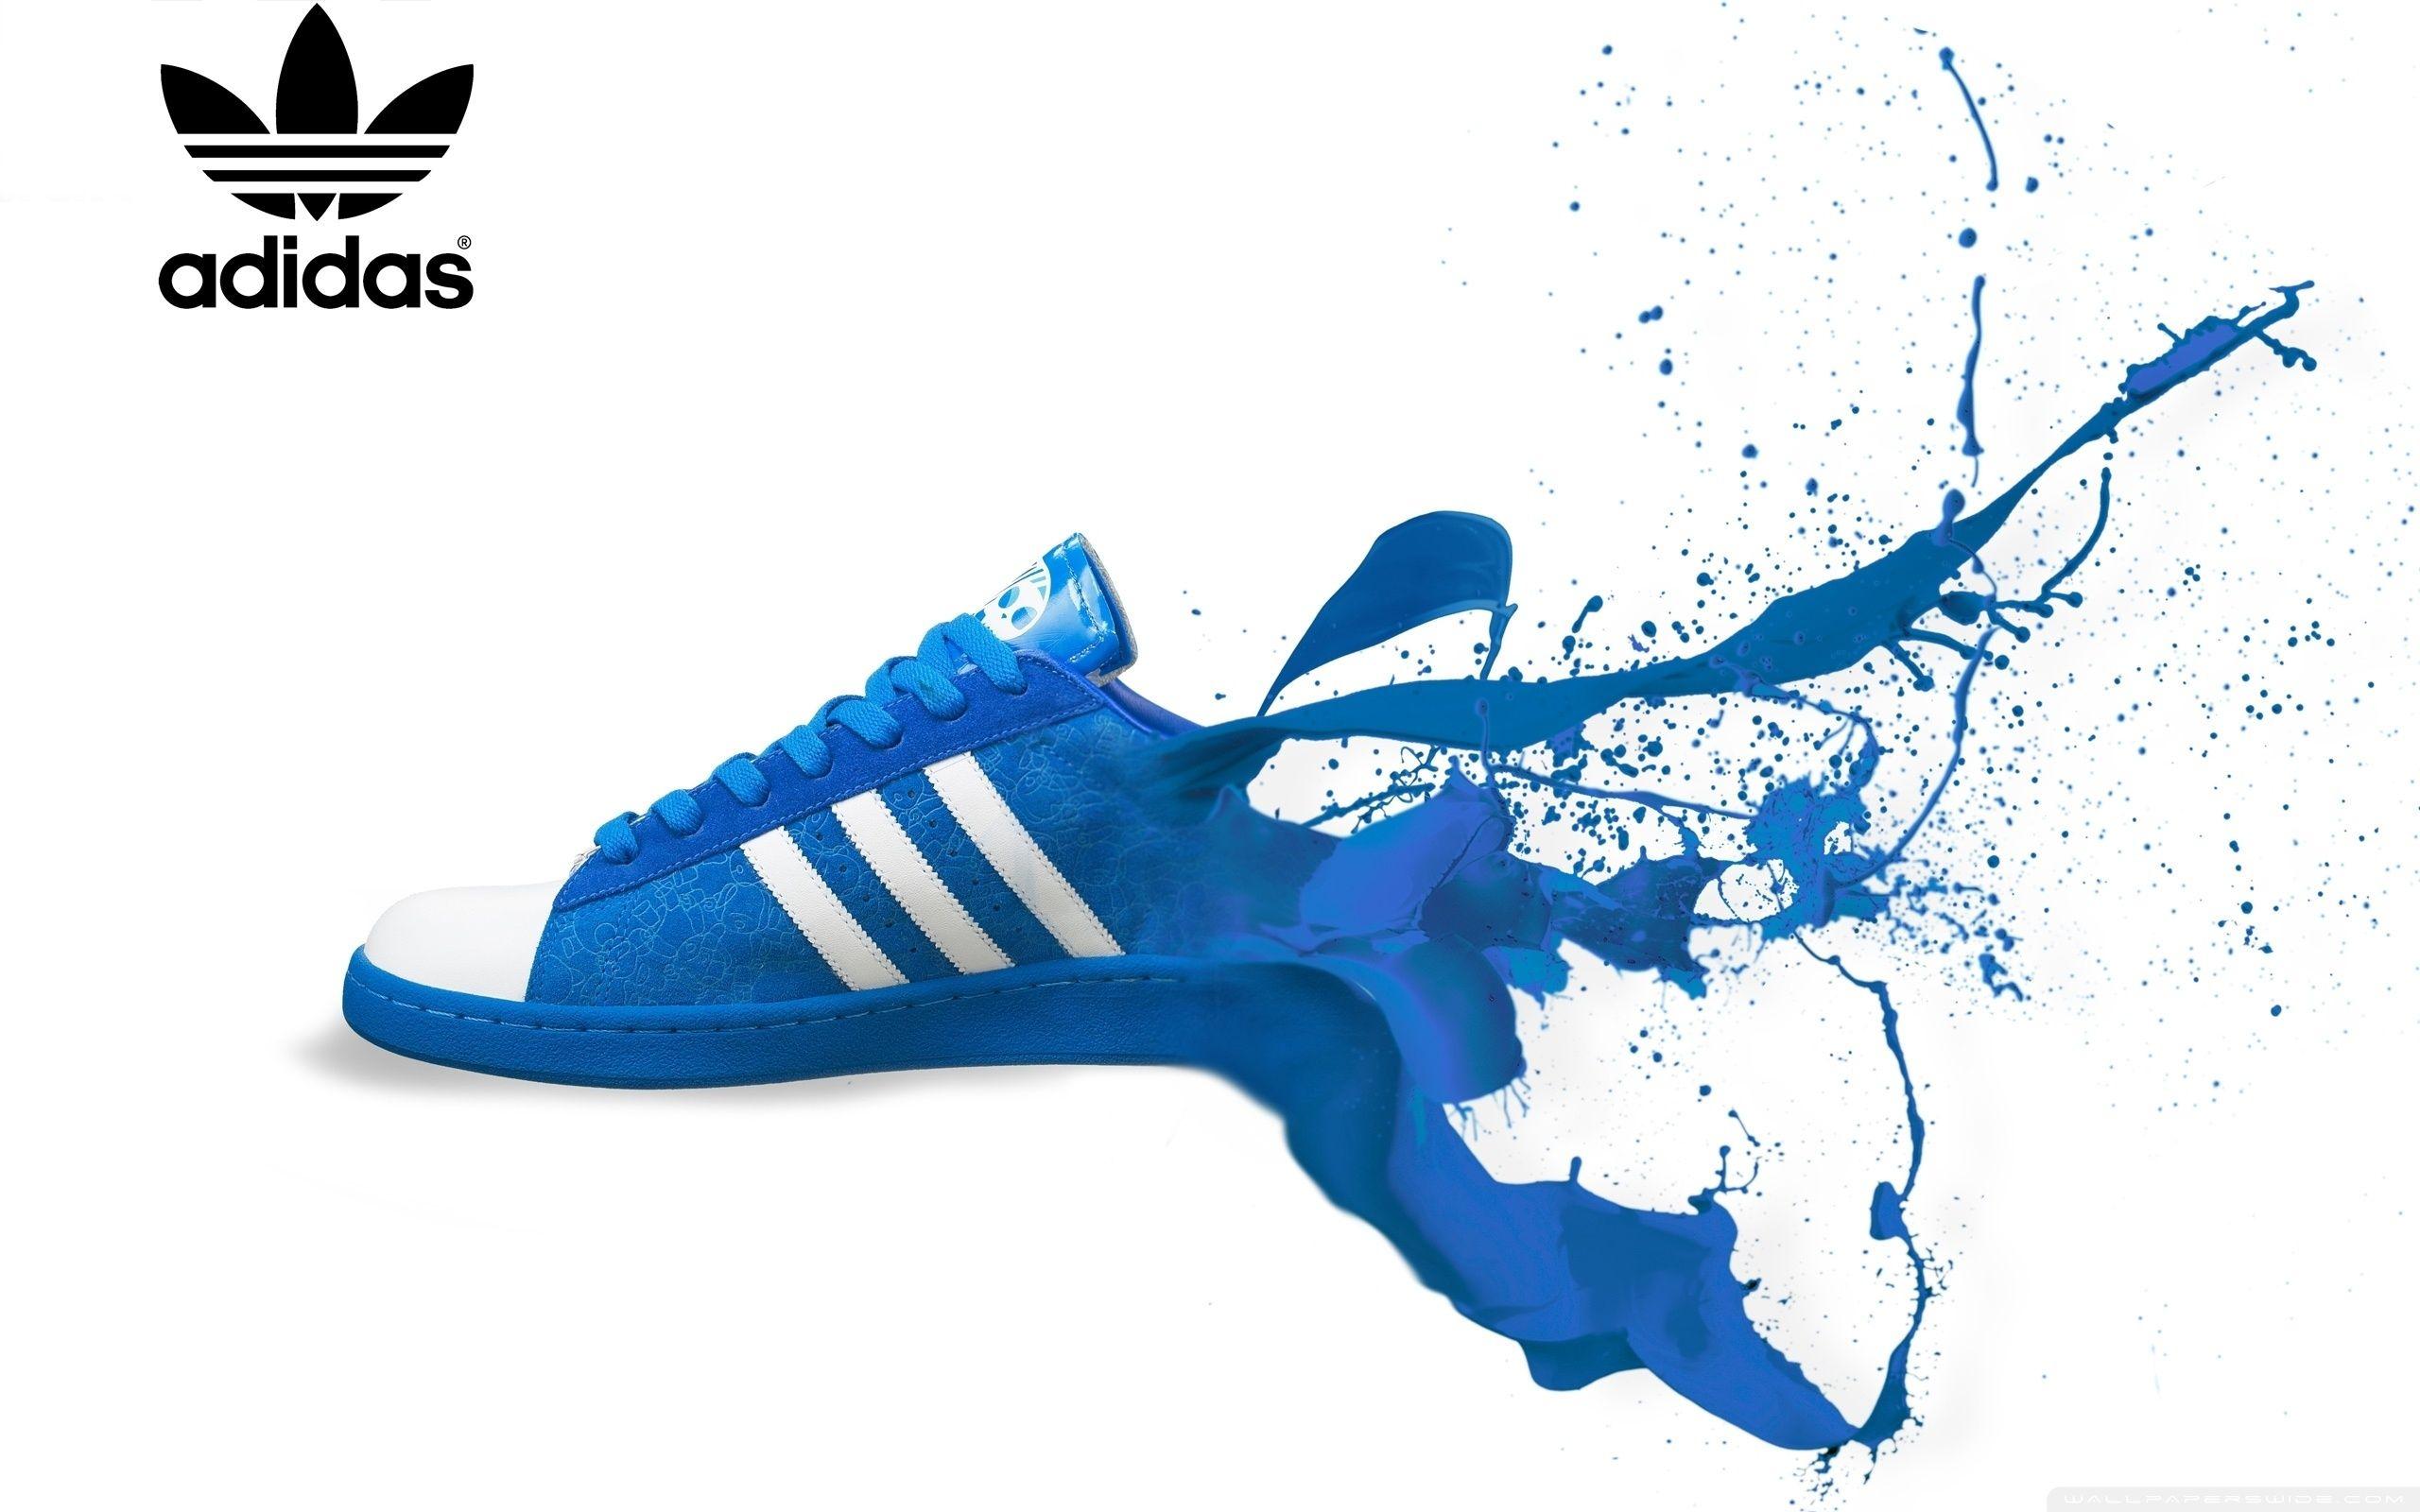 Adidas Shoes Wallpapers - Wallpaper Cave